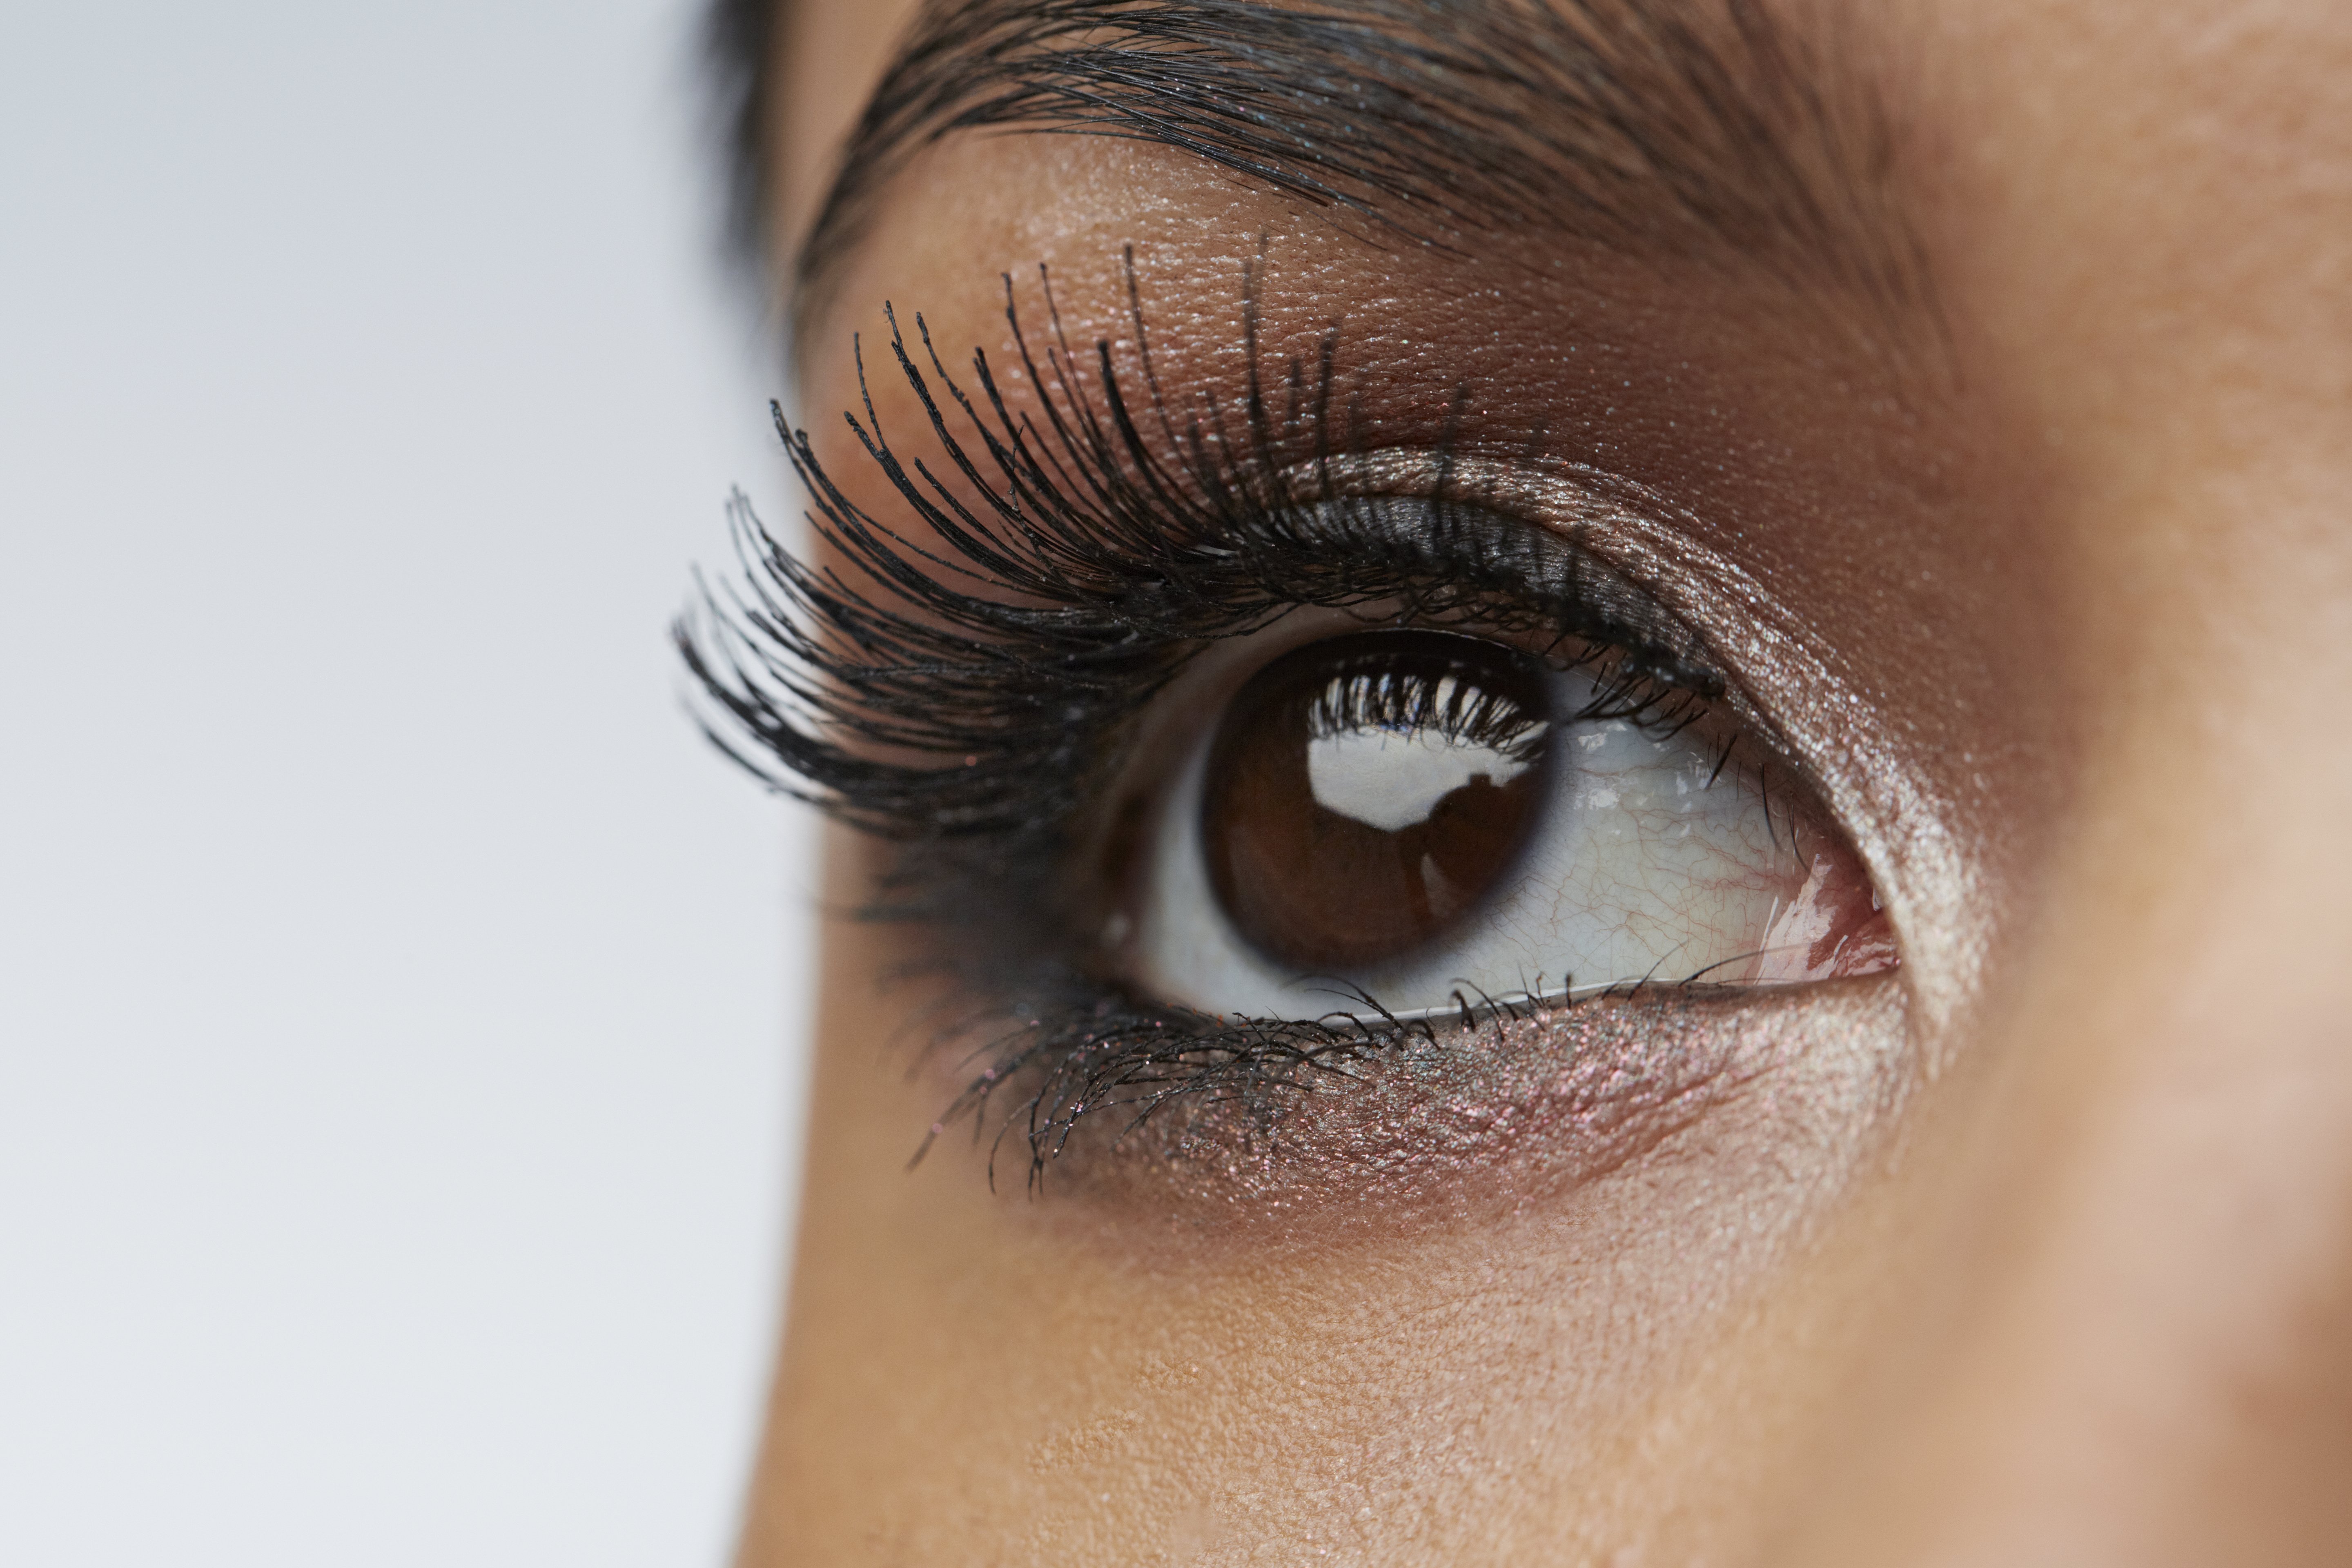 Photo of an eye with long lashes | Source: Getty Images